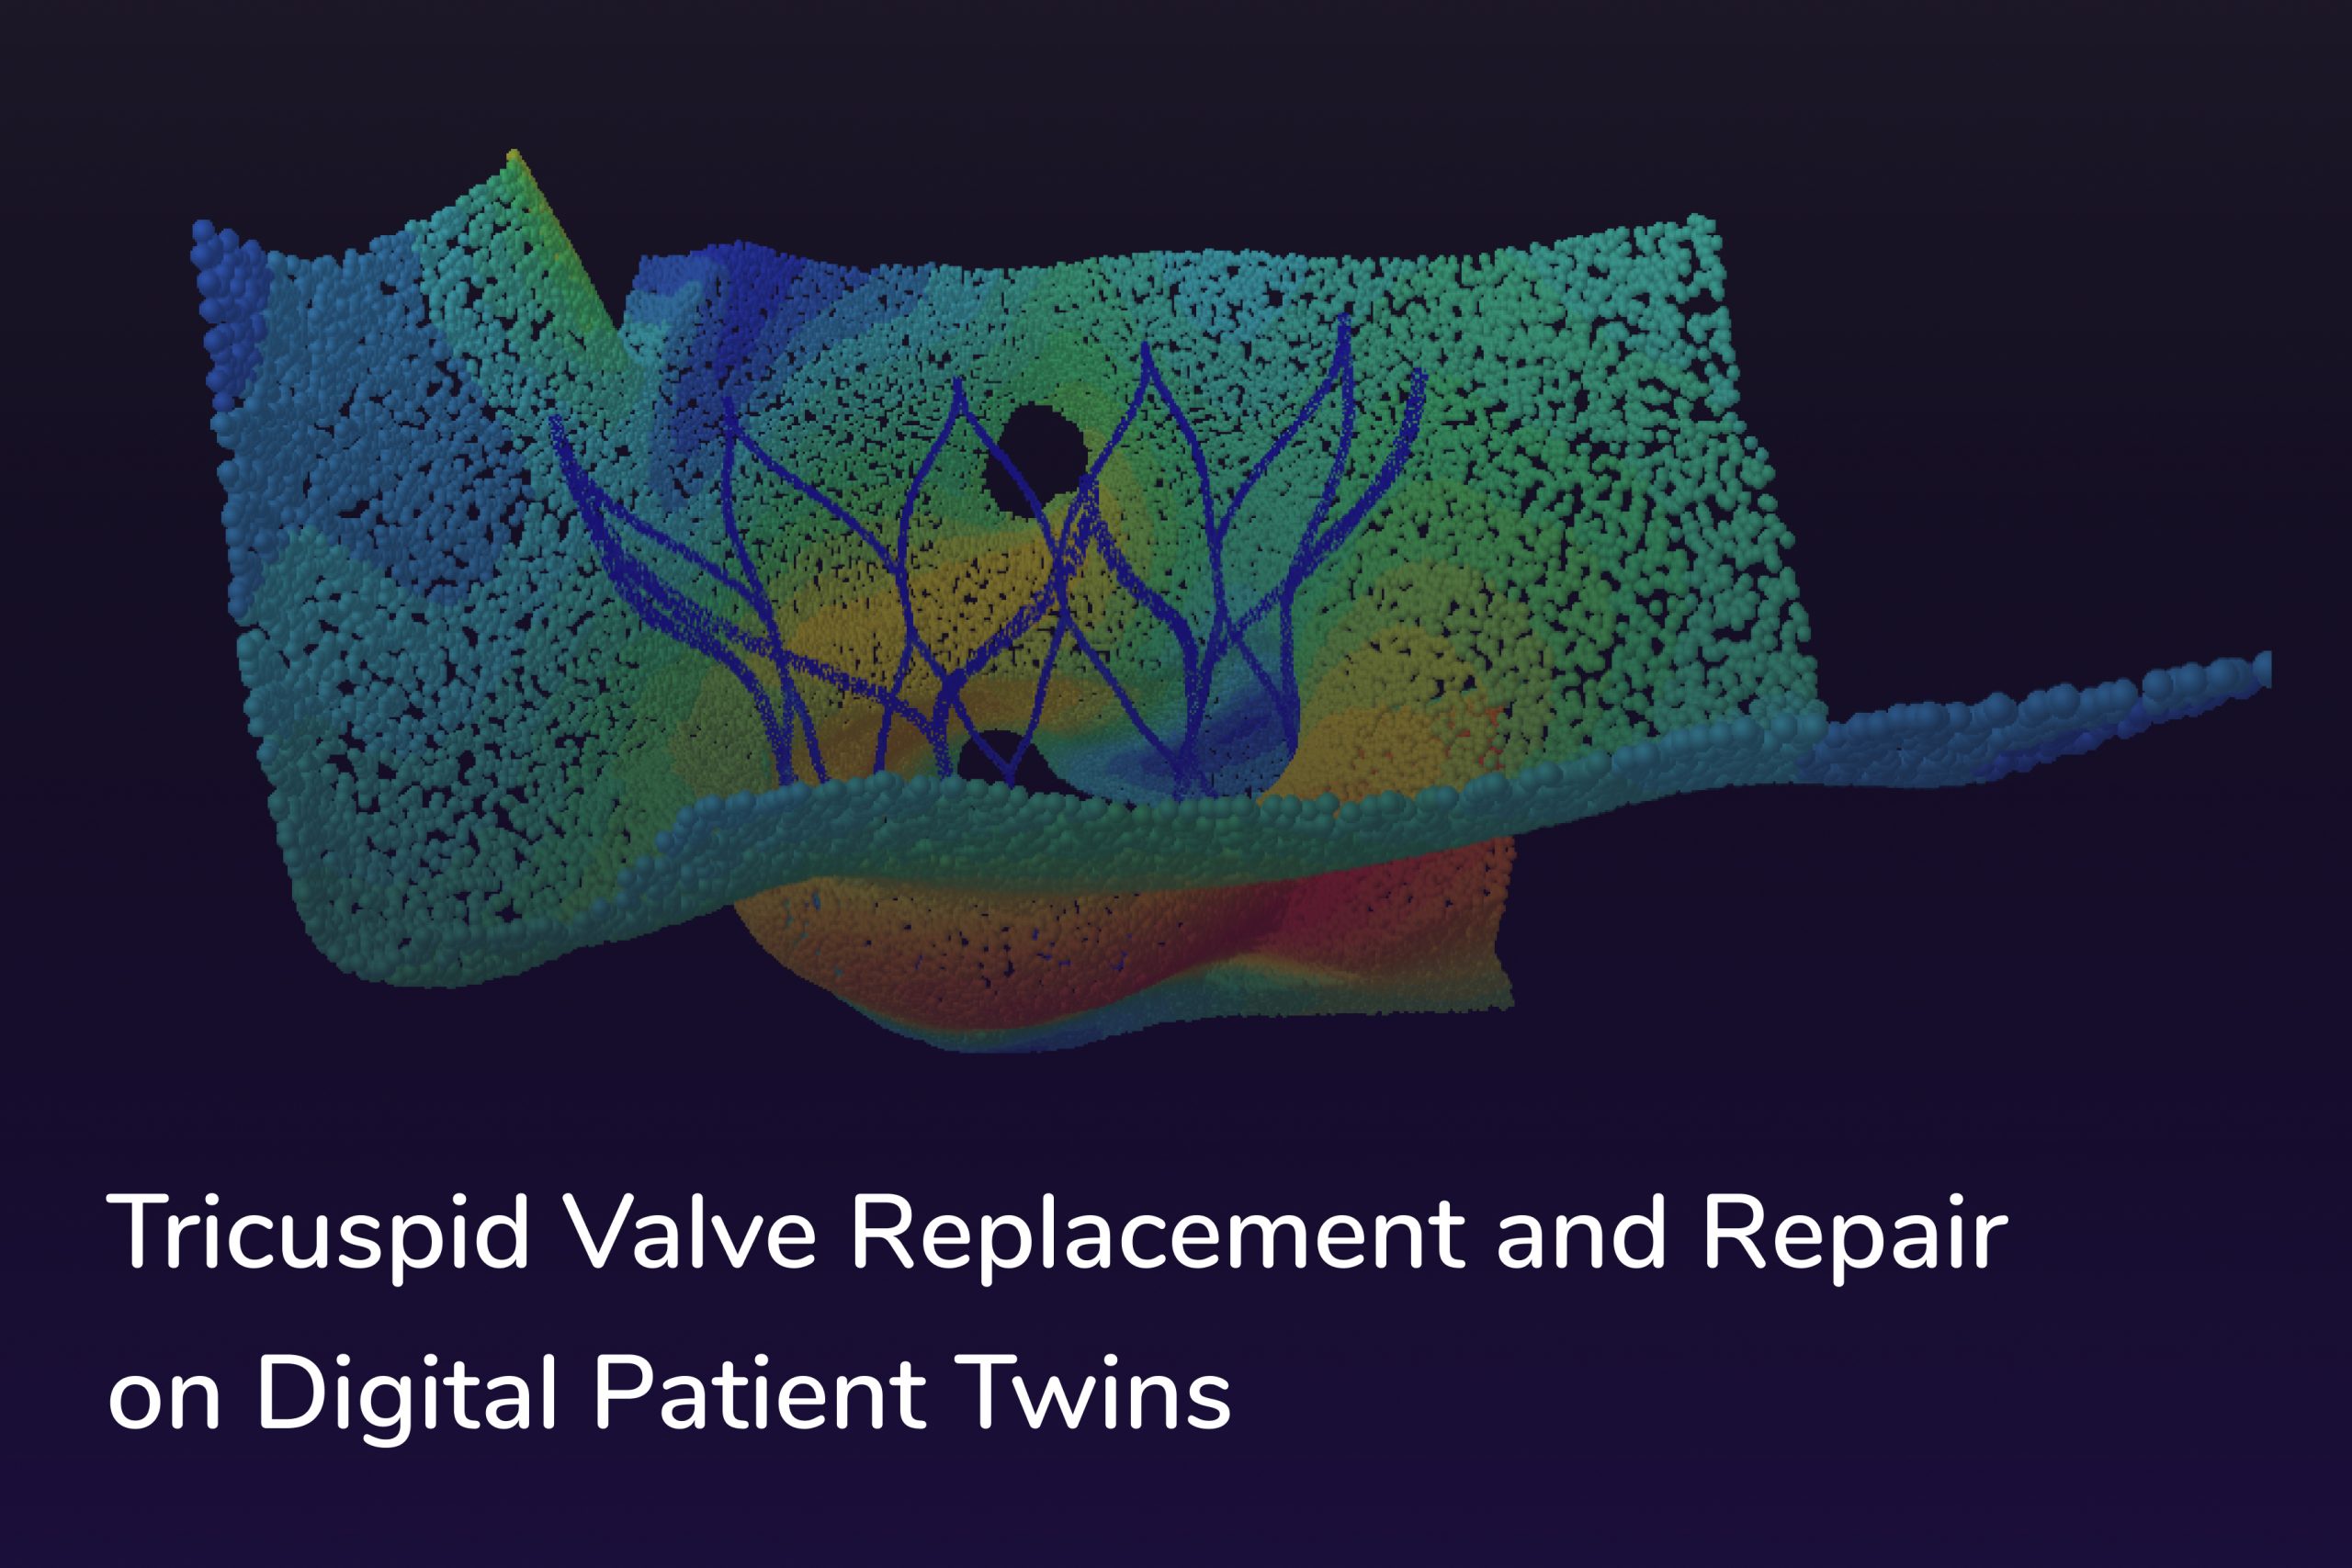 Tricuspid Valve Replacement and Repair on Digital Patient Twins: Solving Challenges with Analysis and Simulation